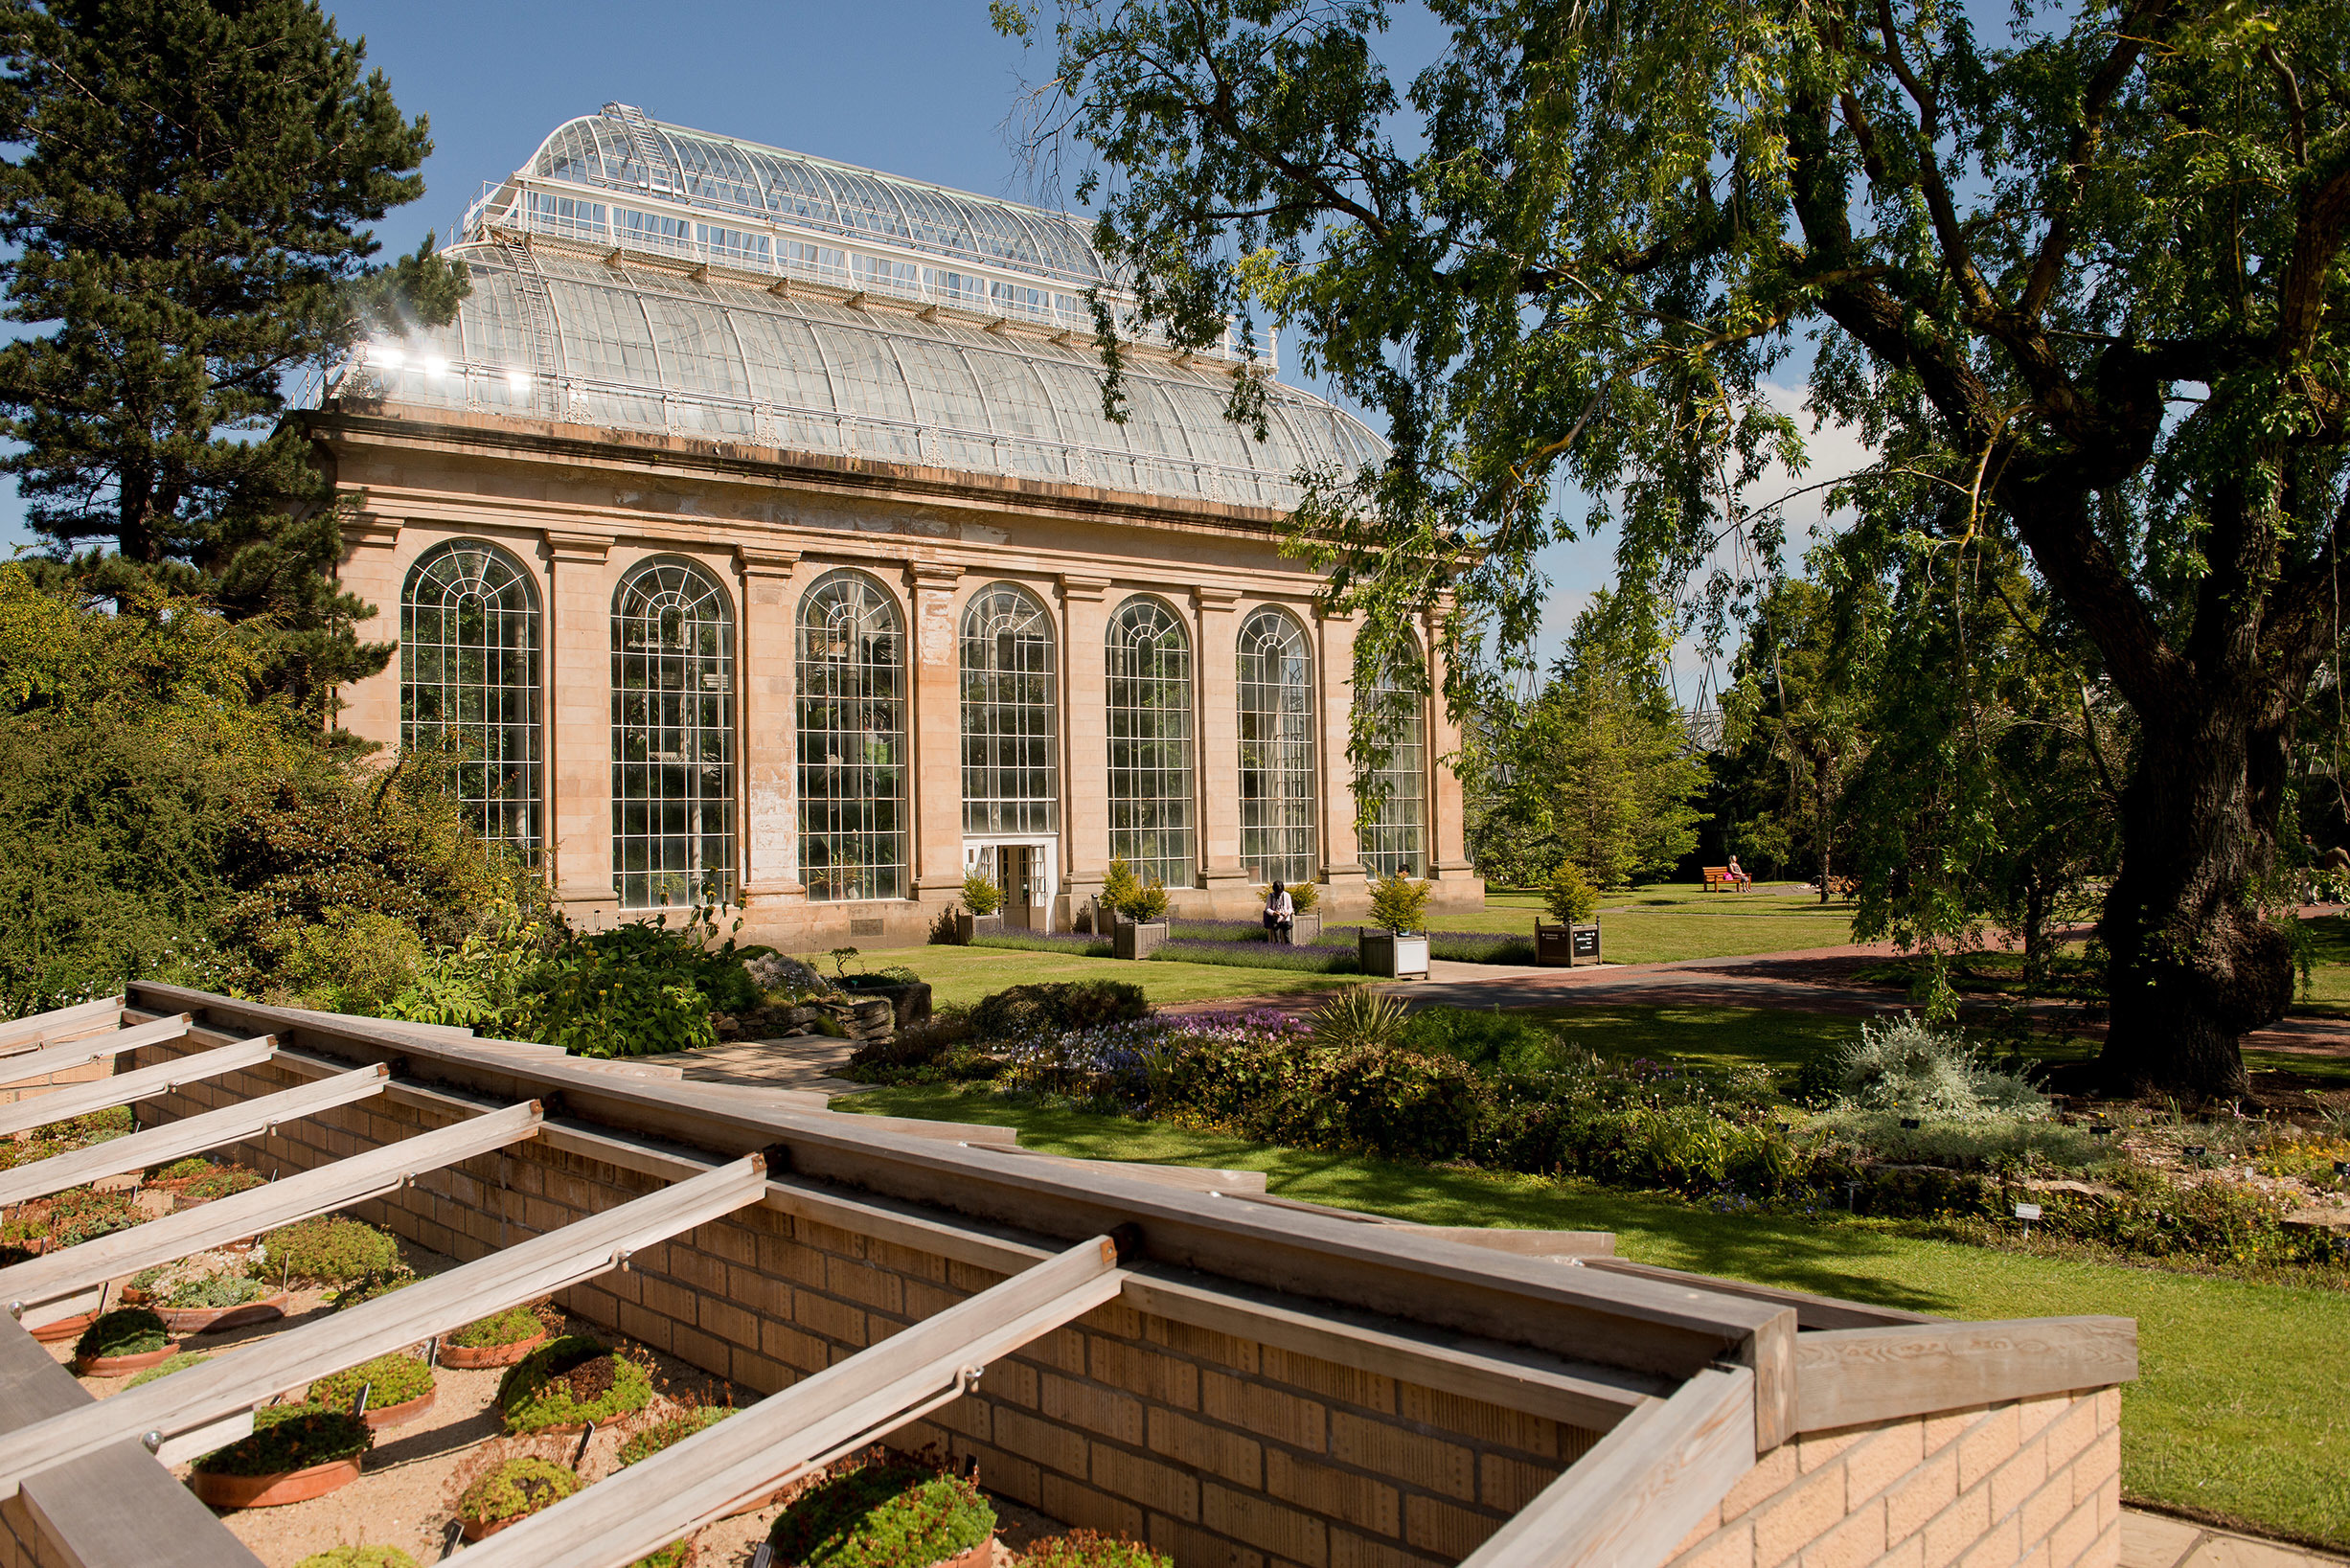 <p>Royal Botanic Garden Edinburgh's Temperate Palm House was constructed in 1858.</p>